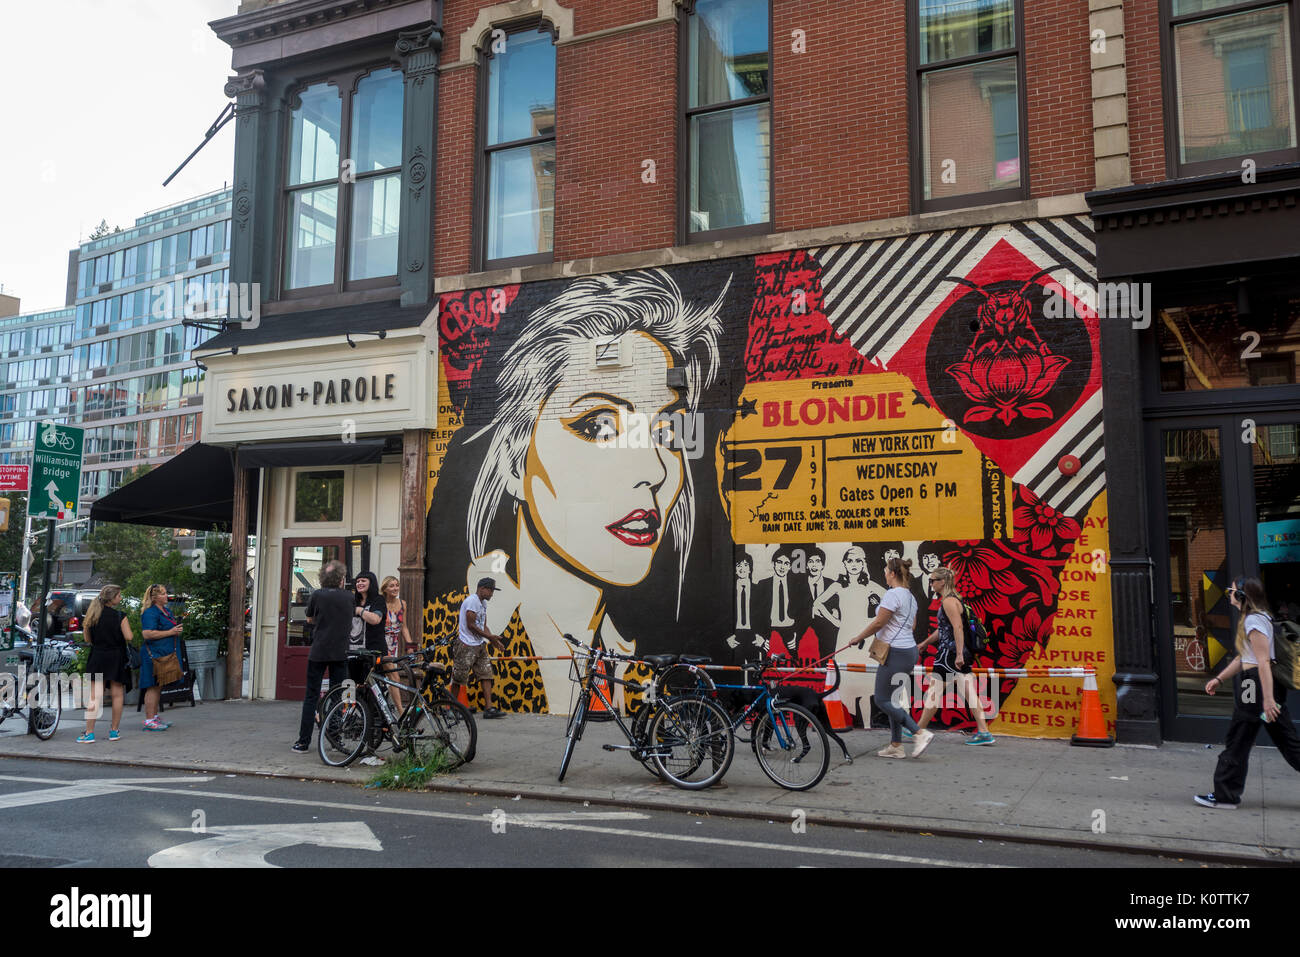 New York, USA. 23rd Aug, 2017. Passersby stop to admire a newly completed mural, by Shepard Fairey, in the East Village. The mural features Debbie Harry, lead singer for the rock group Blondie, who got their start in 1979 at CBGB which was located across the street. Fairy's work is also featured in Blondie's latest album “Polinator” which was released in May 2017 Credit: Stacy Walsh Rosenstock/Alamy Live News Stock Photo